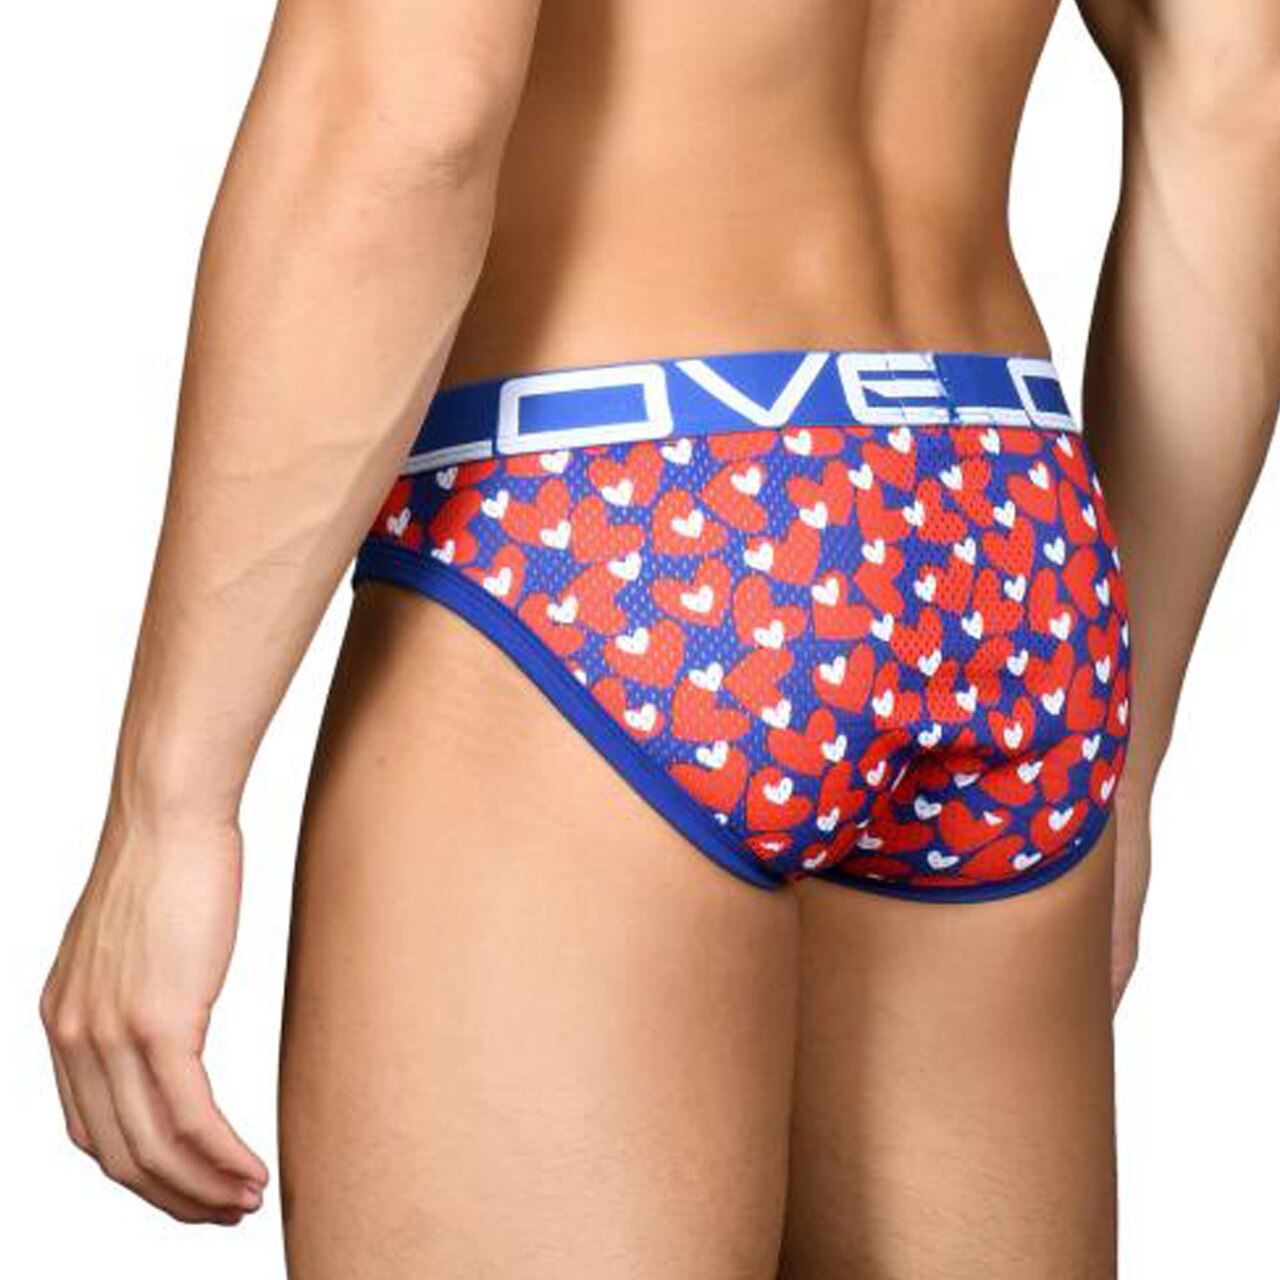 SALE - Mens Andrew Christian Love Sweetheart Mesh Brief w/ Almost Naked